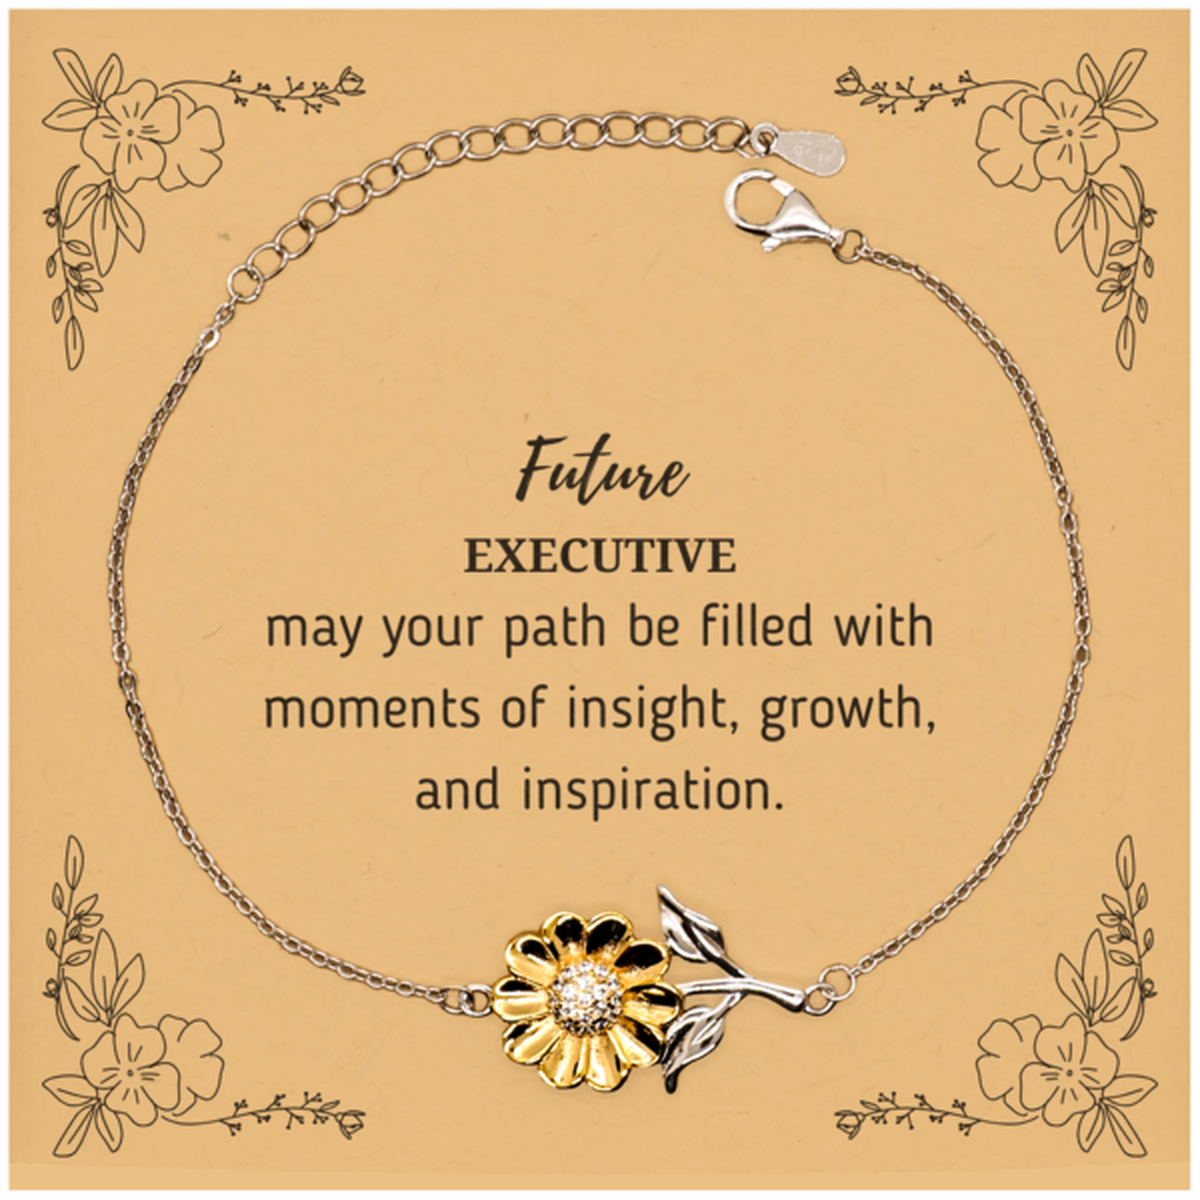 Future Executive Gifts, May your path be filled with moments of insight, Graduation Gifts for New Executive, Christmas Unique Sunflower Bracelet For Men, Women, Friends